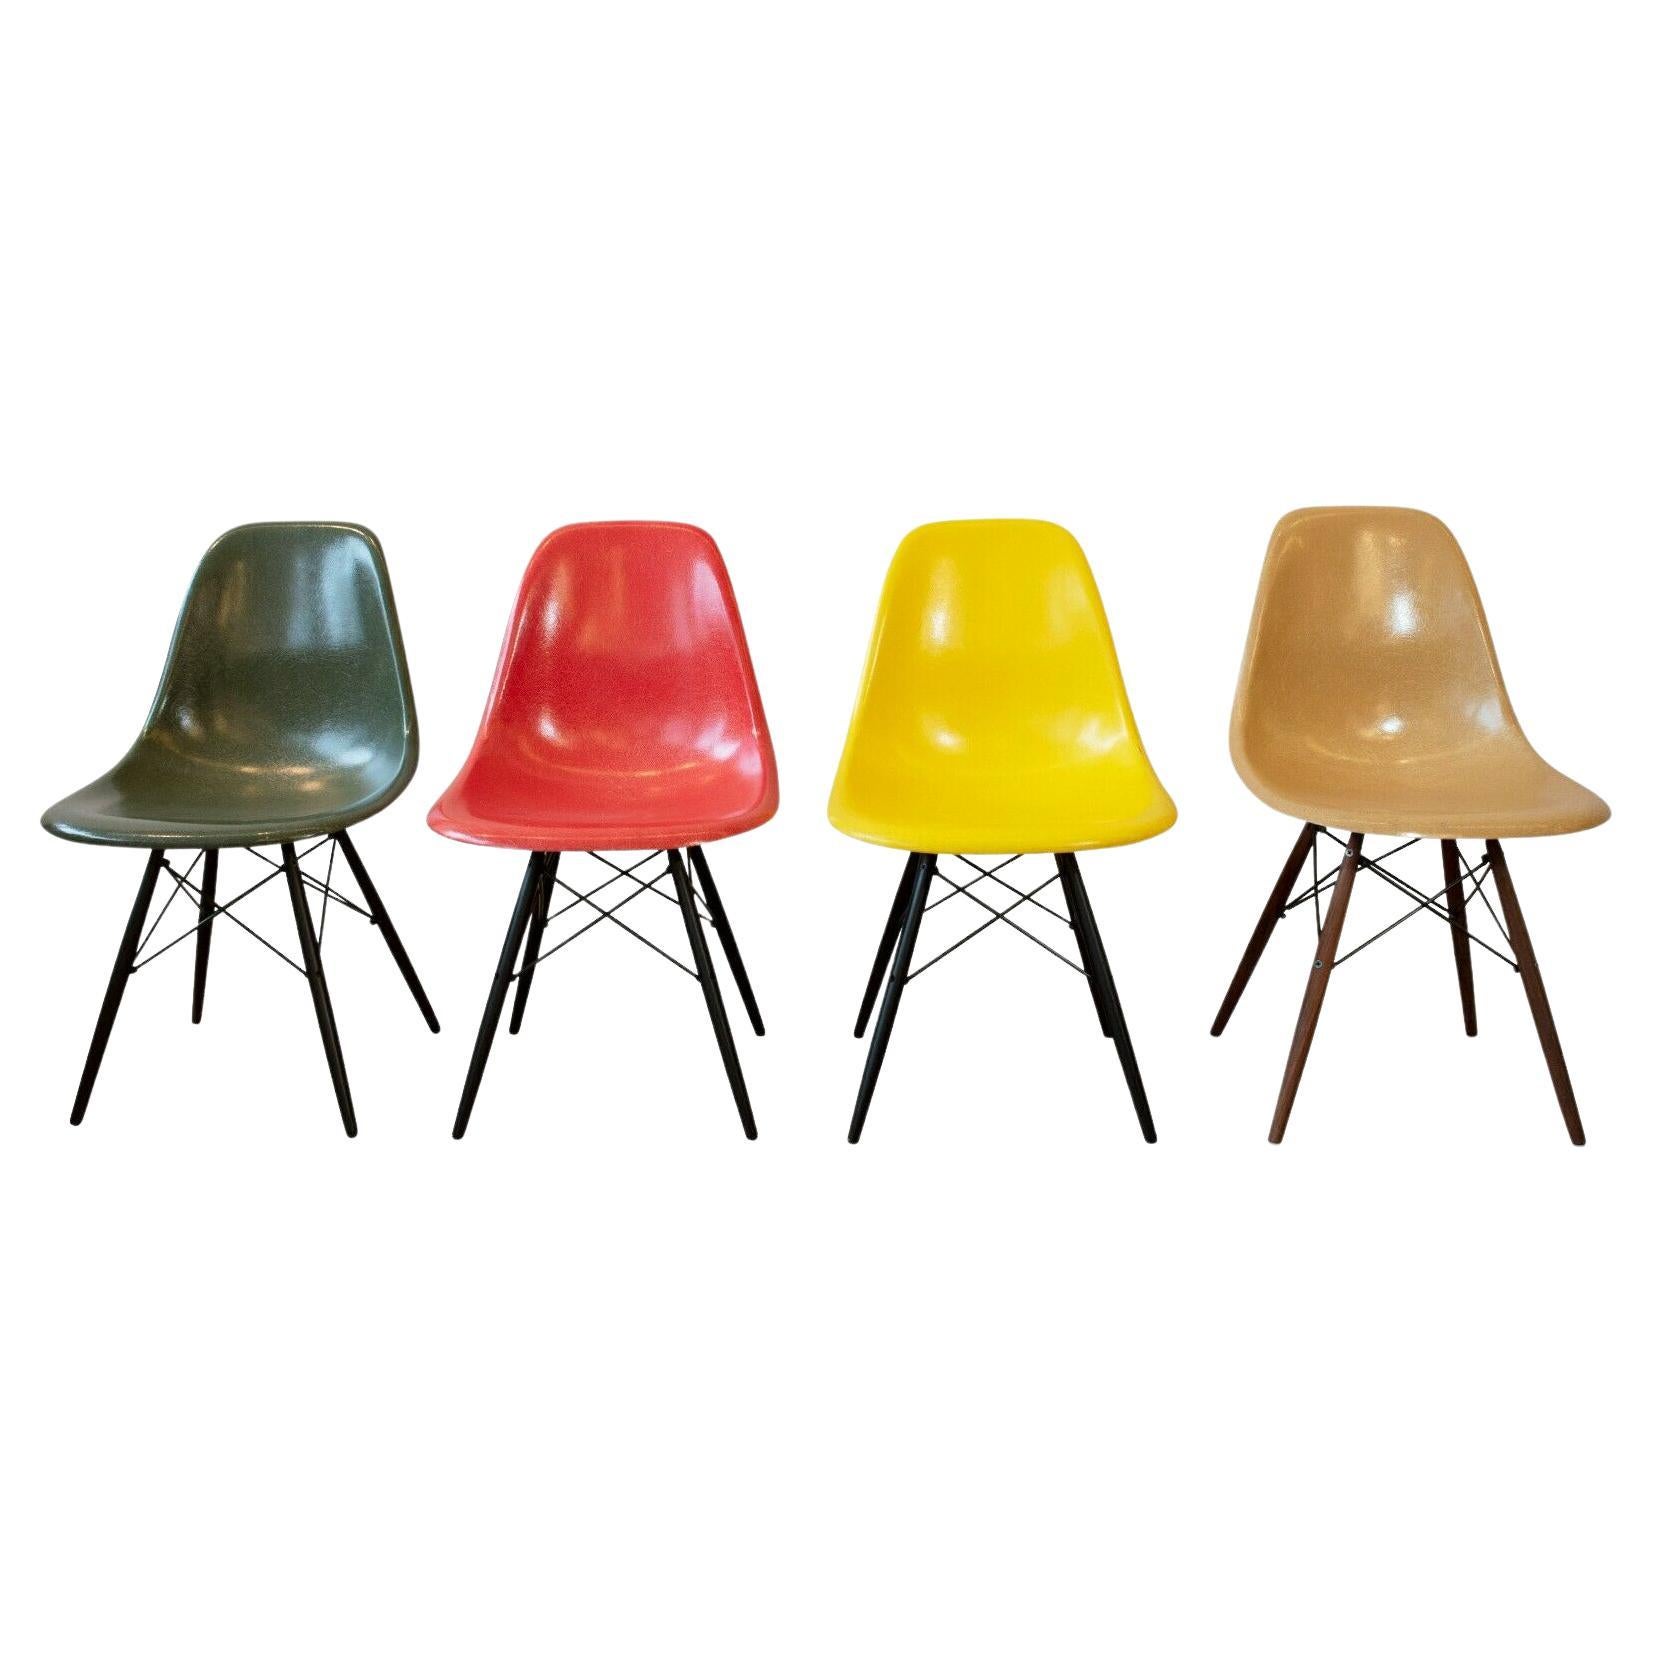 A beautiful and fun set of 8 1950s/60's fibreglass chairs by Charles and Ray Eames for Herman Miller.

Boasting the iconic Eiffel Tower base, these chairs feature a fibreglass seat that has been moulded to compliment the human form, making them